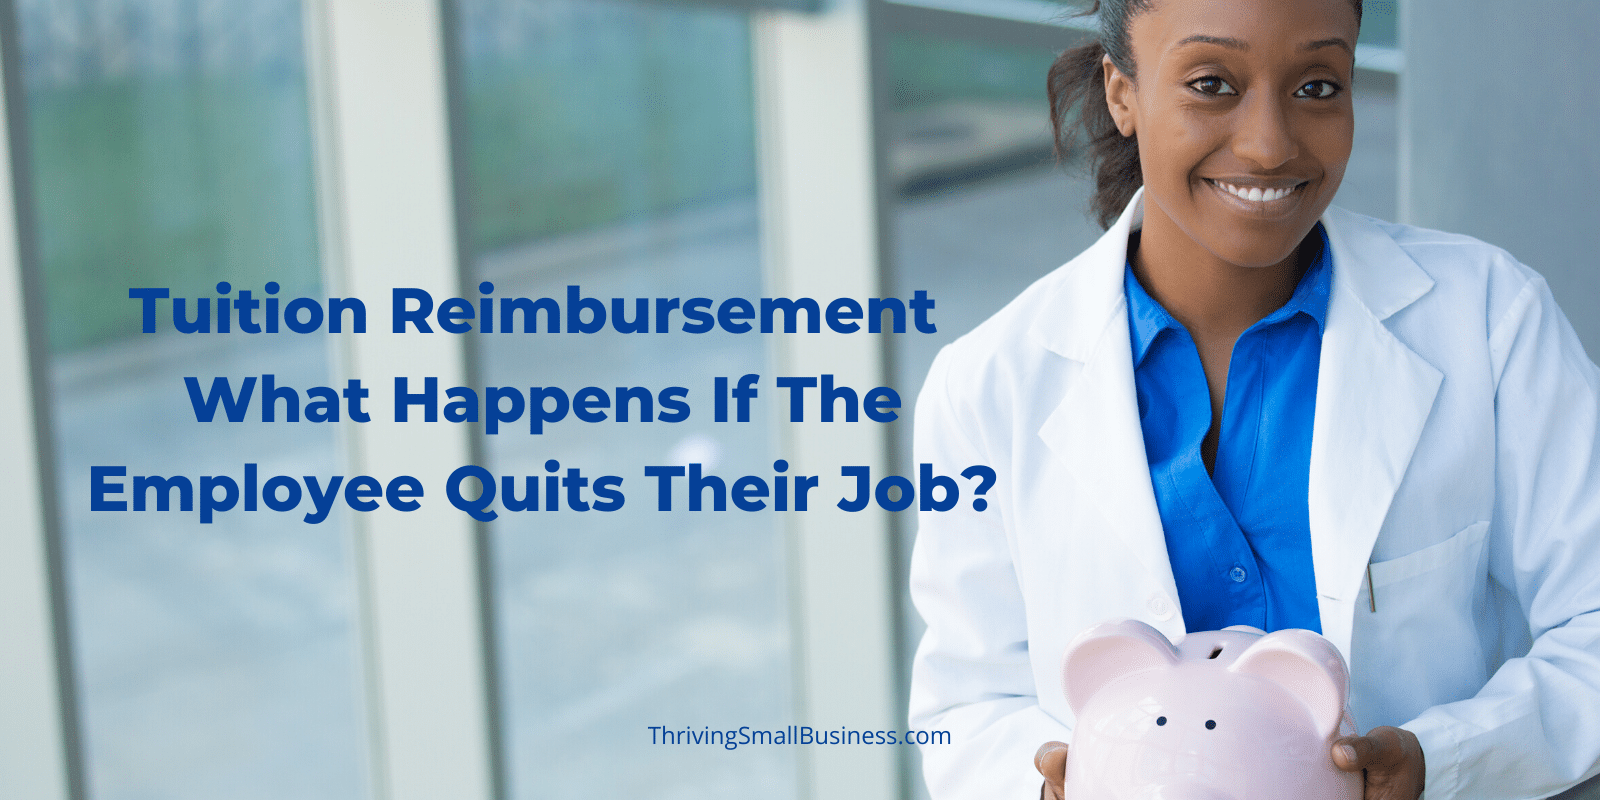 Tuition Reimbursement Policy - What Happens if the Employee Quits Their